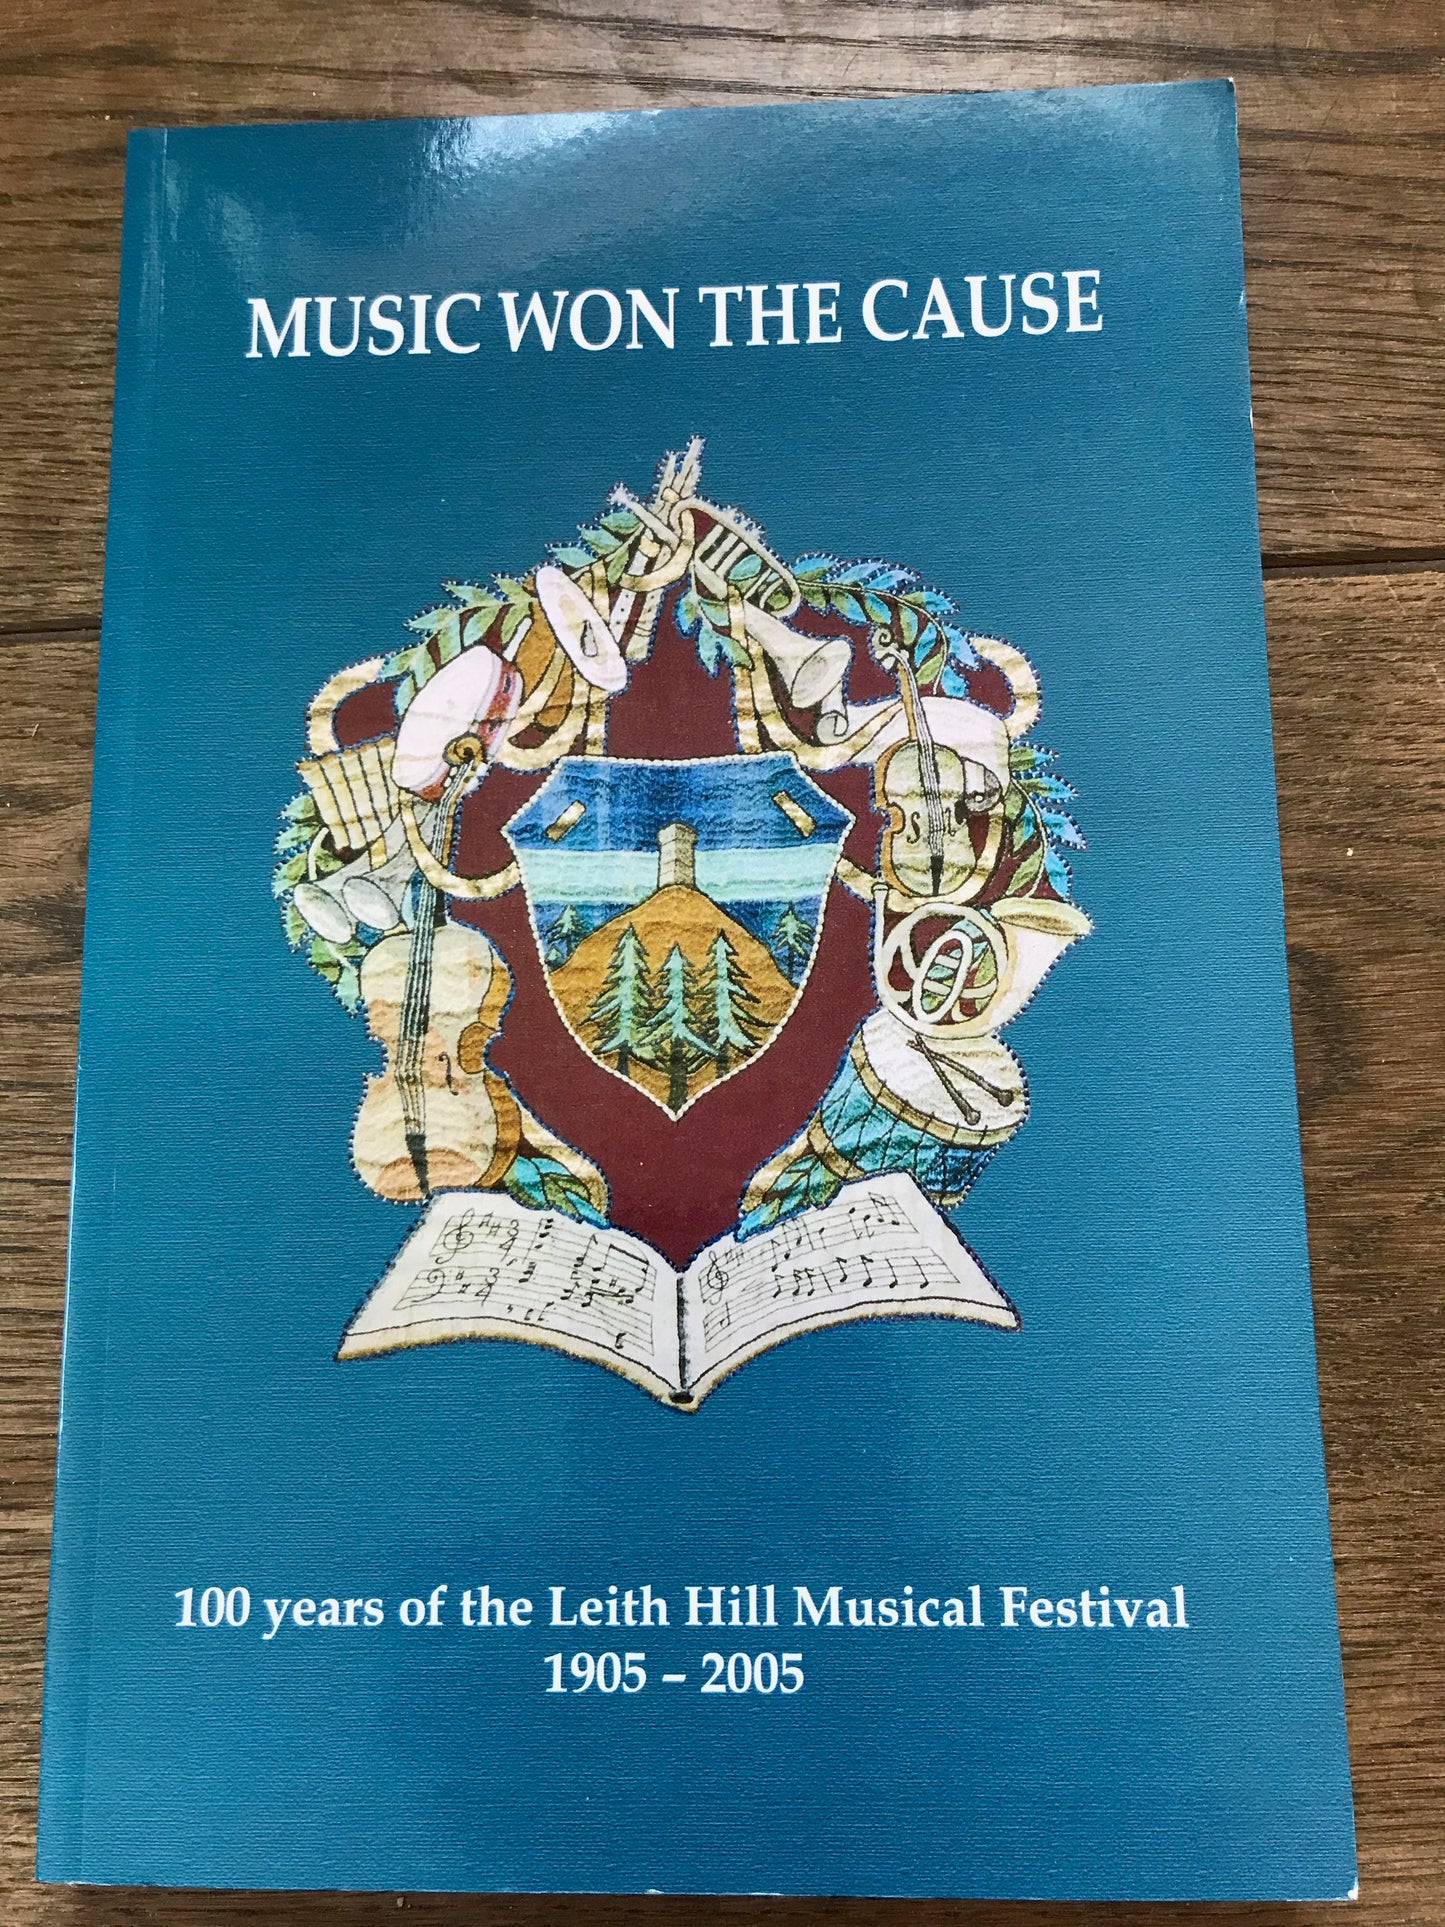 Music Won The Cause - 100 years of the Leith Hill Music Festival 1905-2005